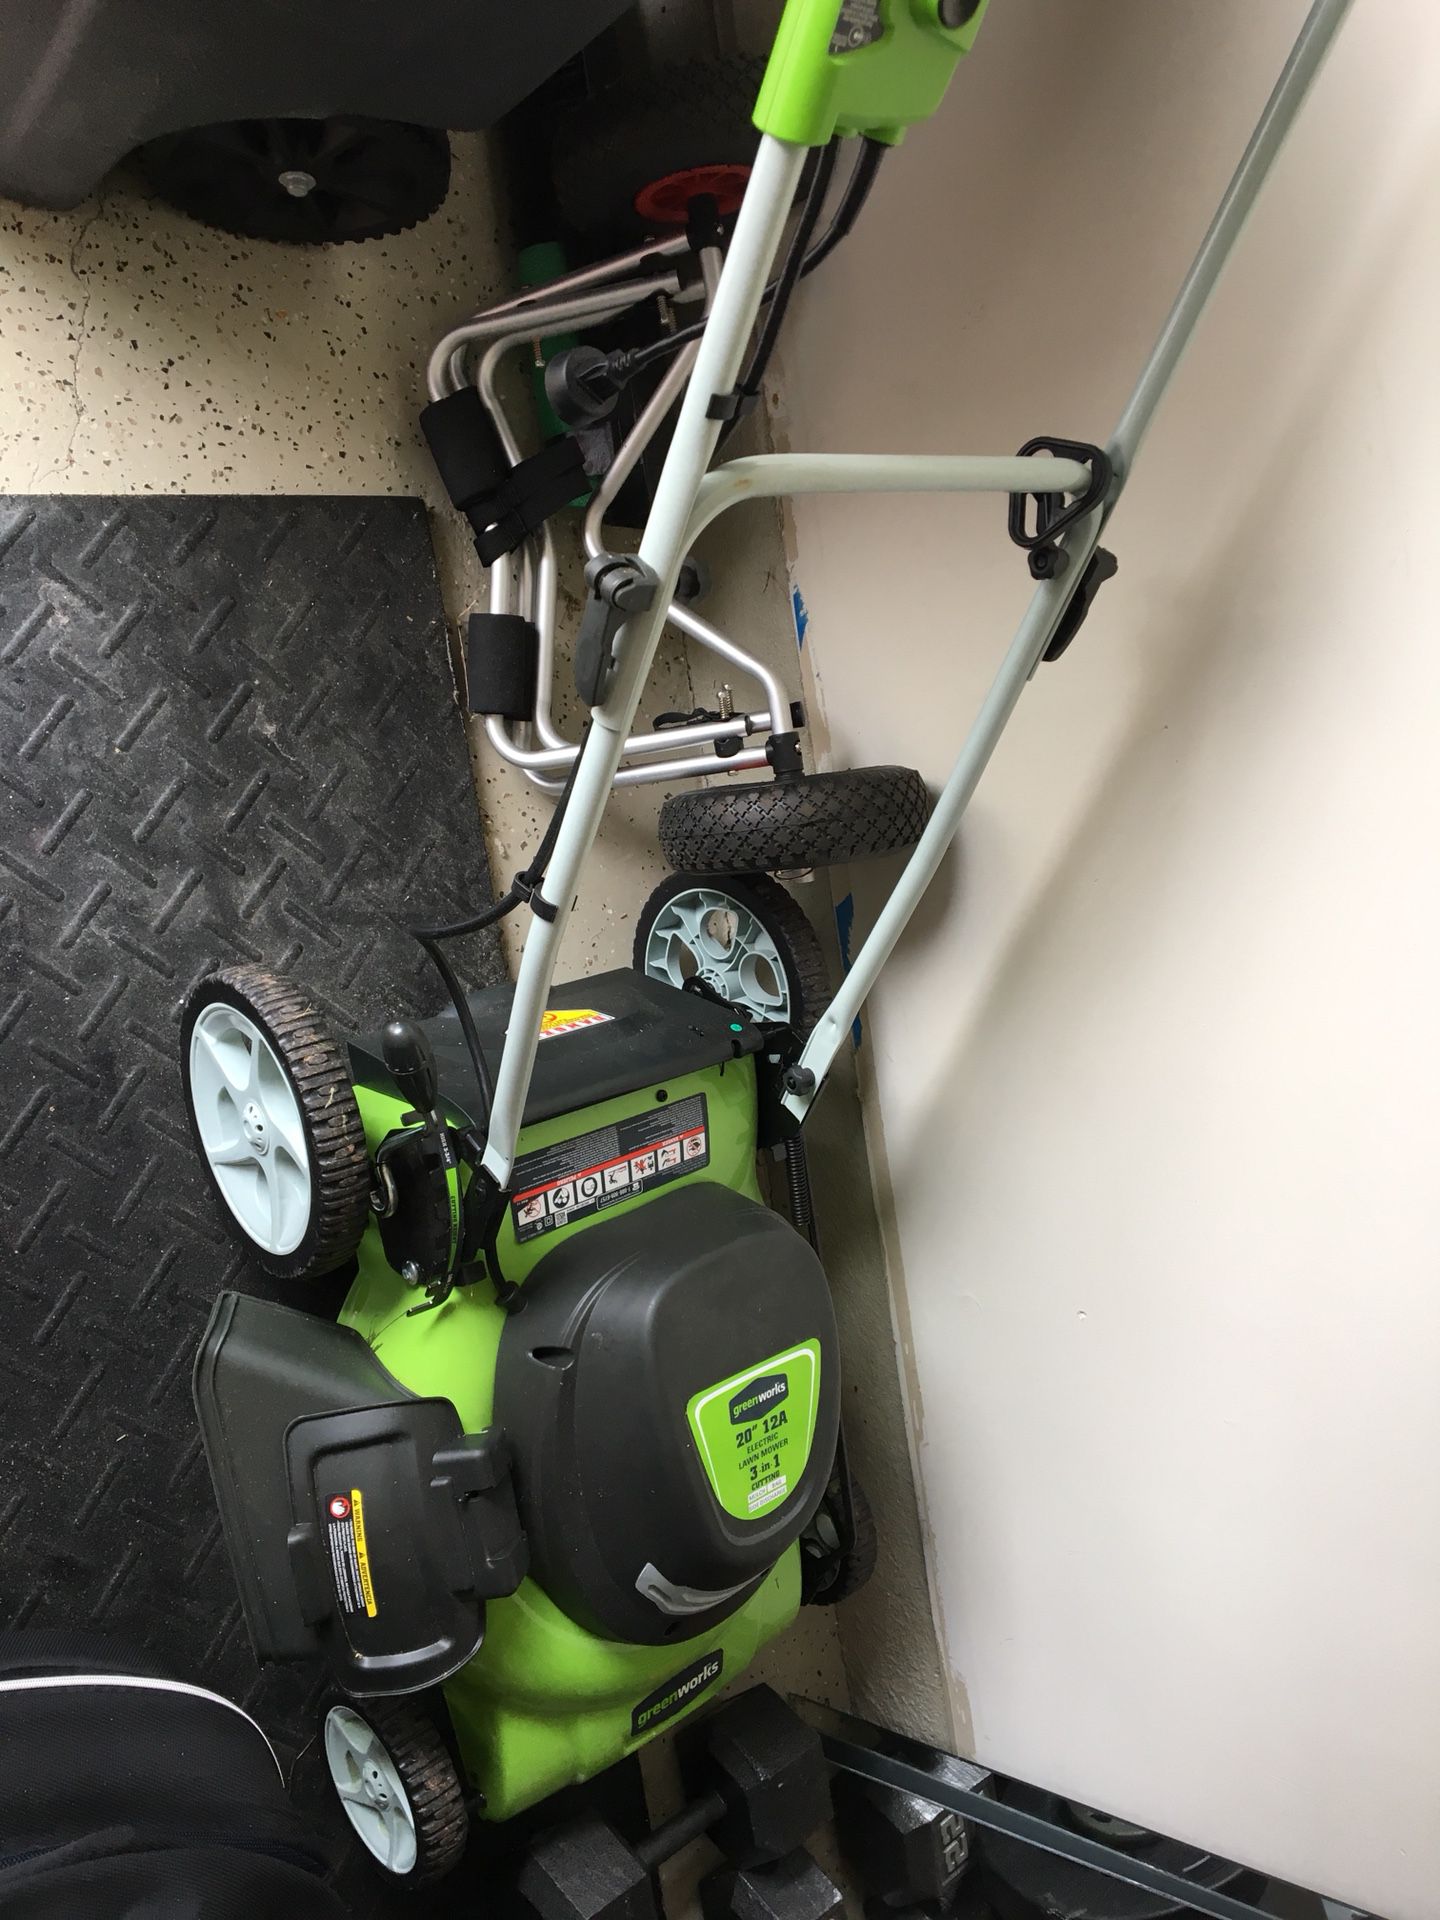 Greenworks 20-Inch 12 Amp Corded Lawn Mower 25022 - $125